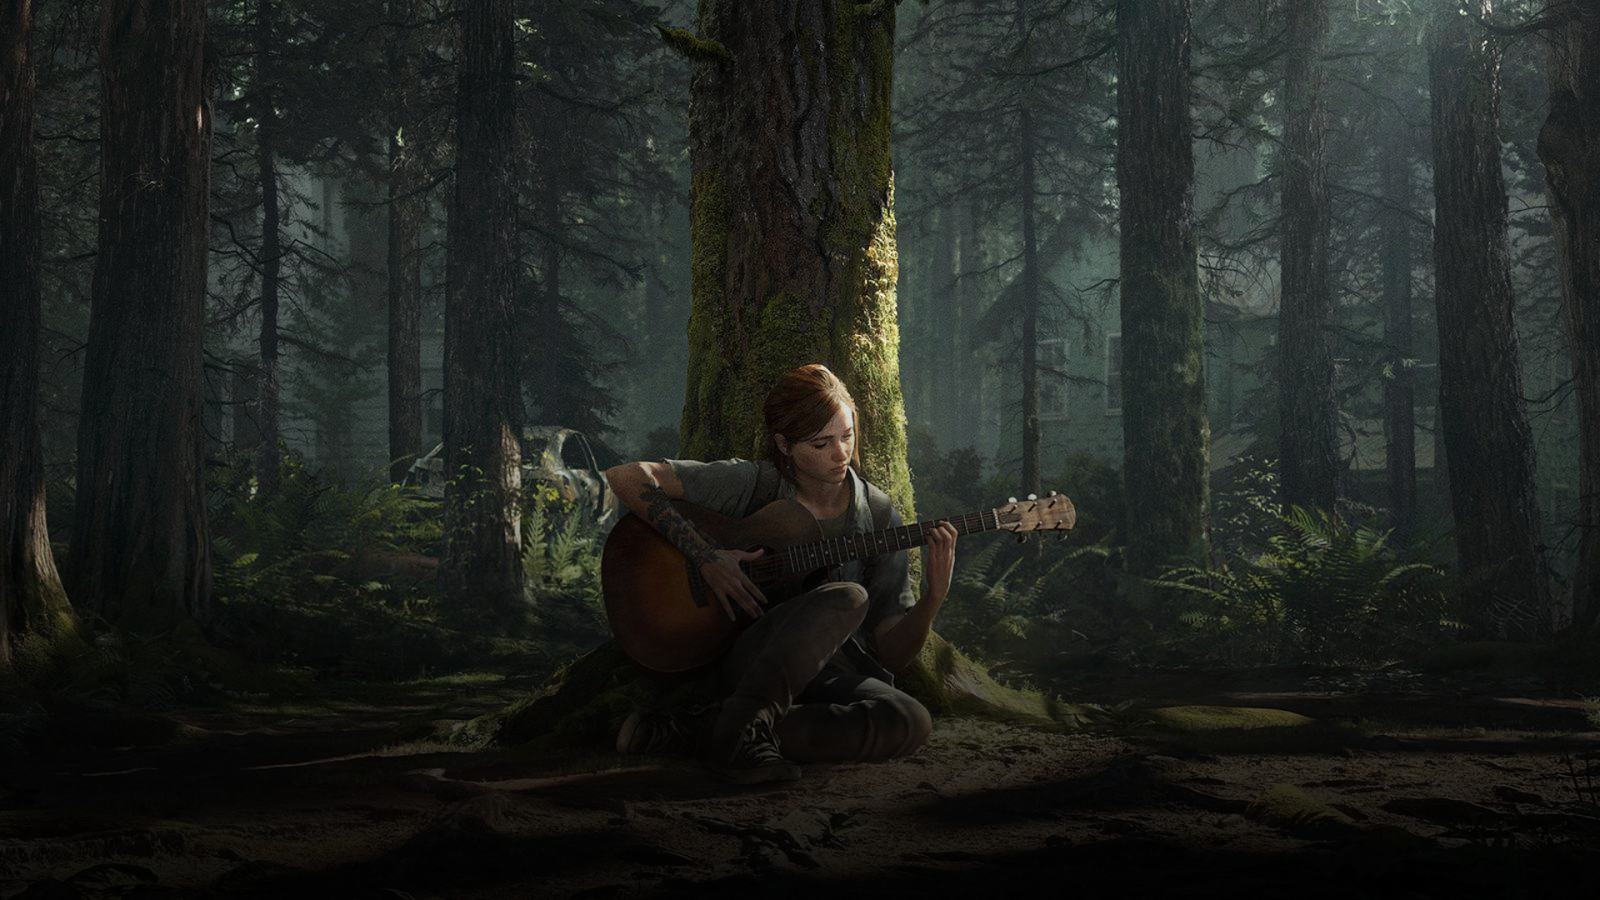 After The Last of Us Part 2, Naughty Dog Is Working on Its “Most Thrilling” New Game